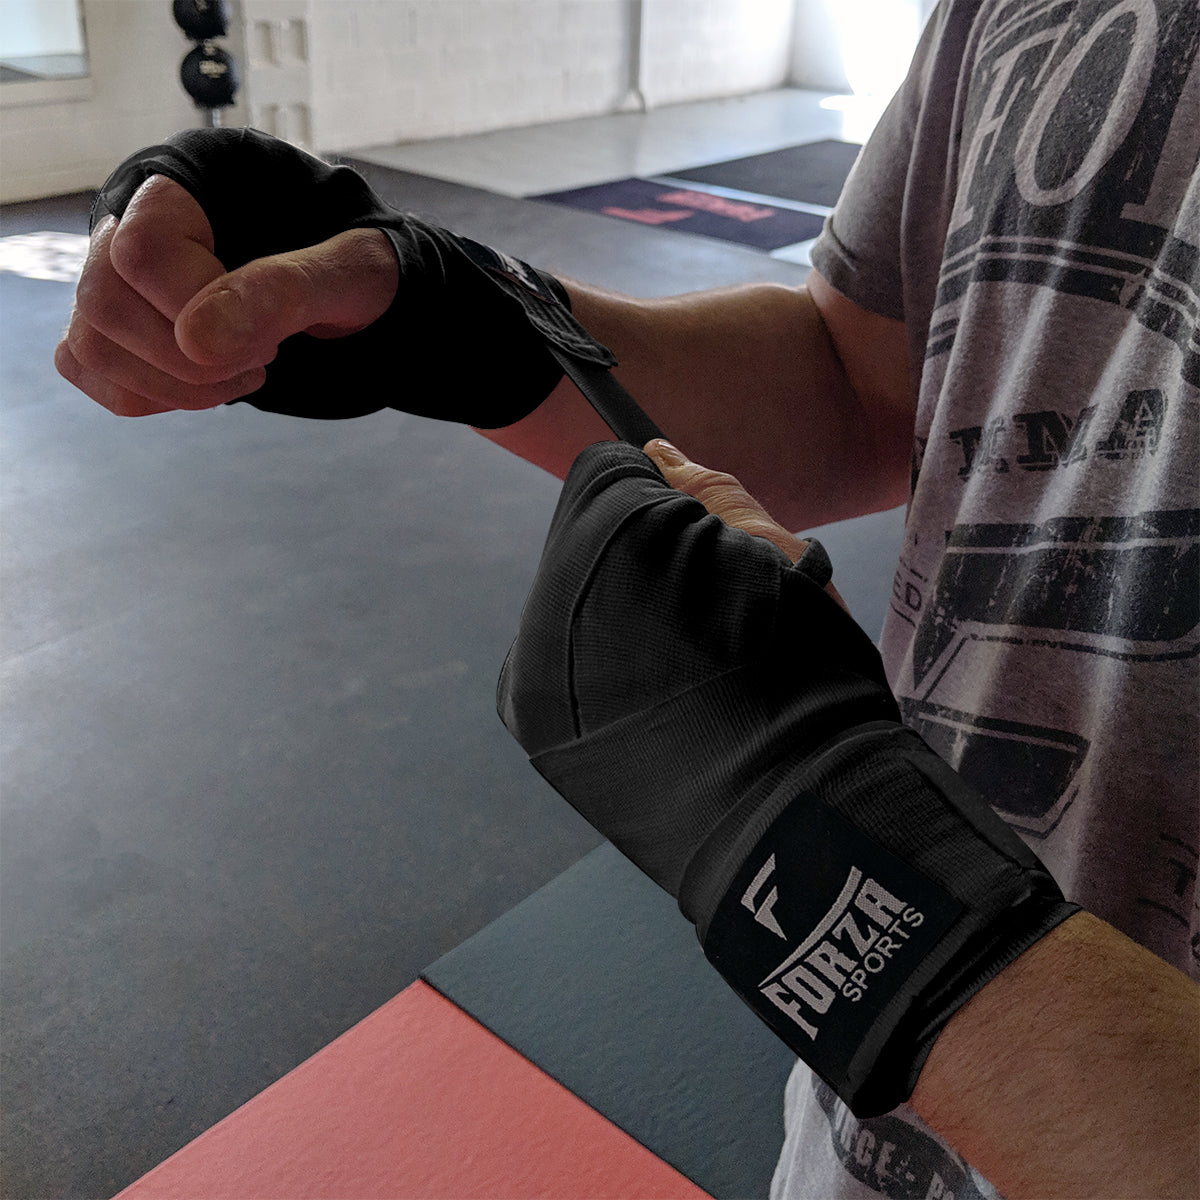 Forza Sports 120" Mexican Style Boxing and MMA Handwraps Forza Sports